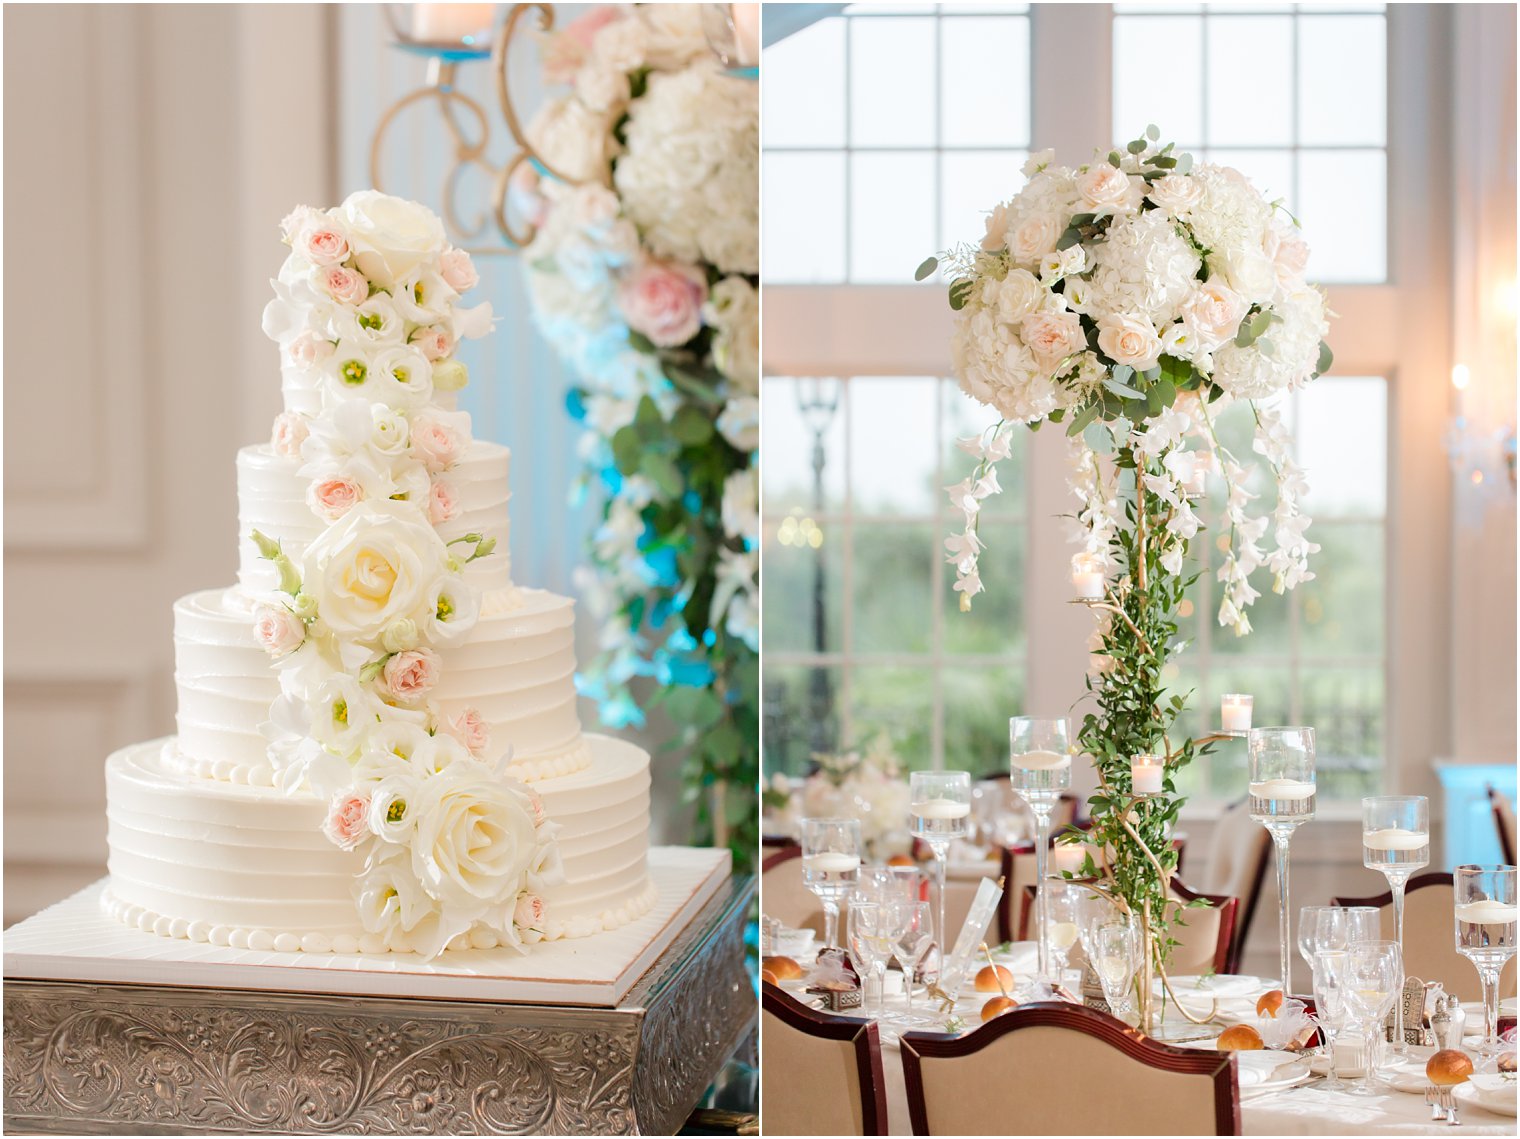 tiered wedding cake by Palermo's Bakery and tall floral ivory and green centerpieces by Crest Florist